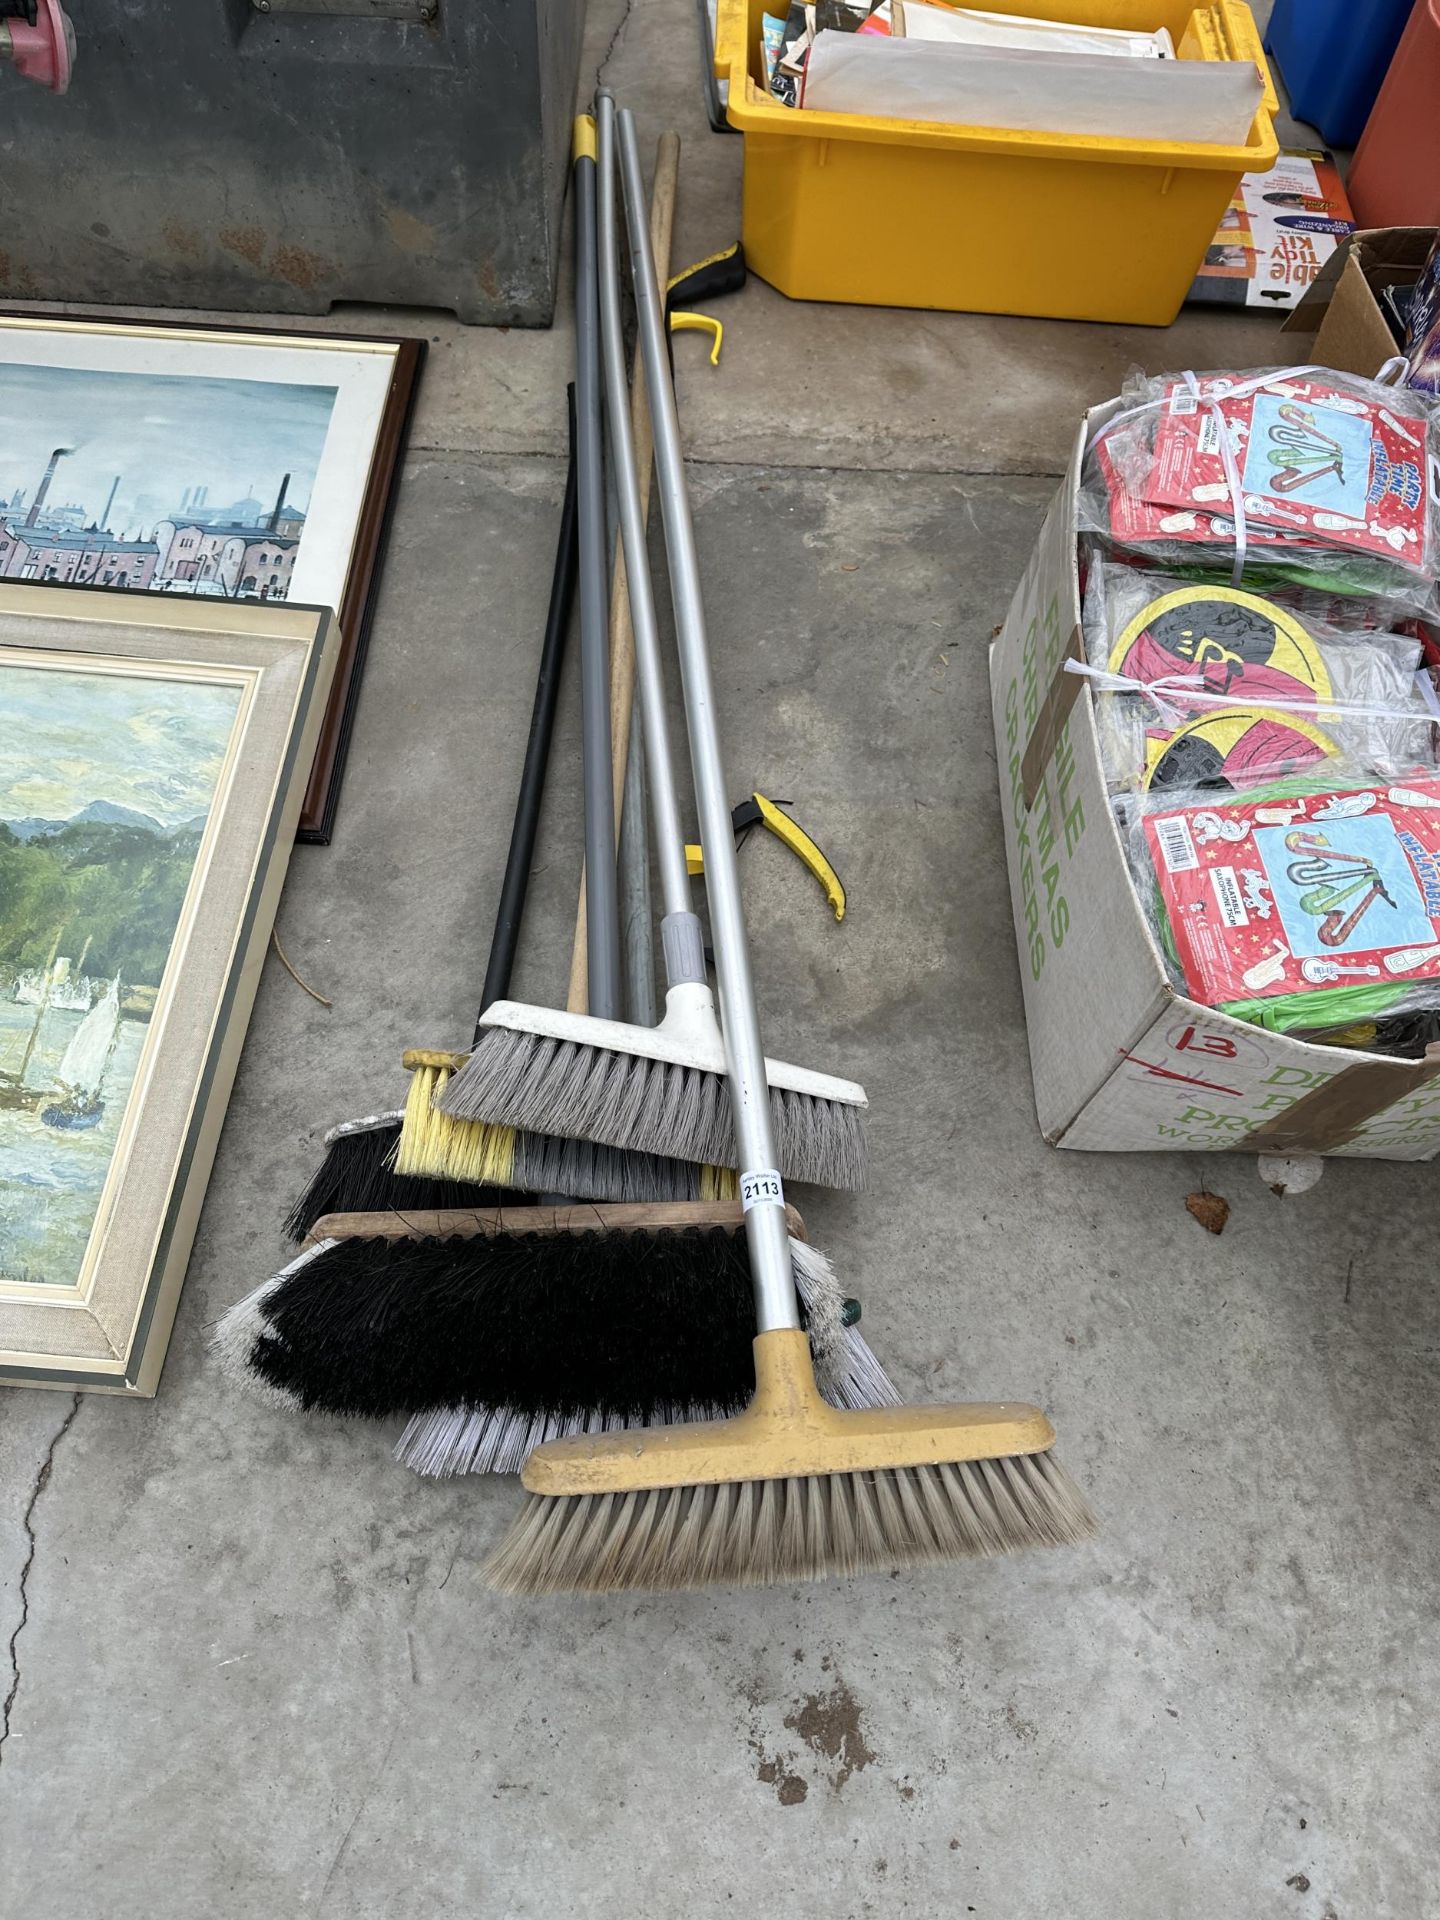 AN ASSORTMENT OF BRUSHES AND A LITTER PICKER